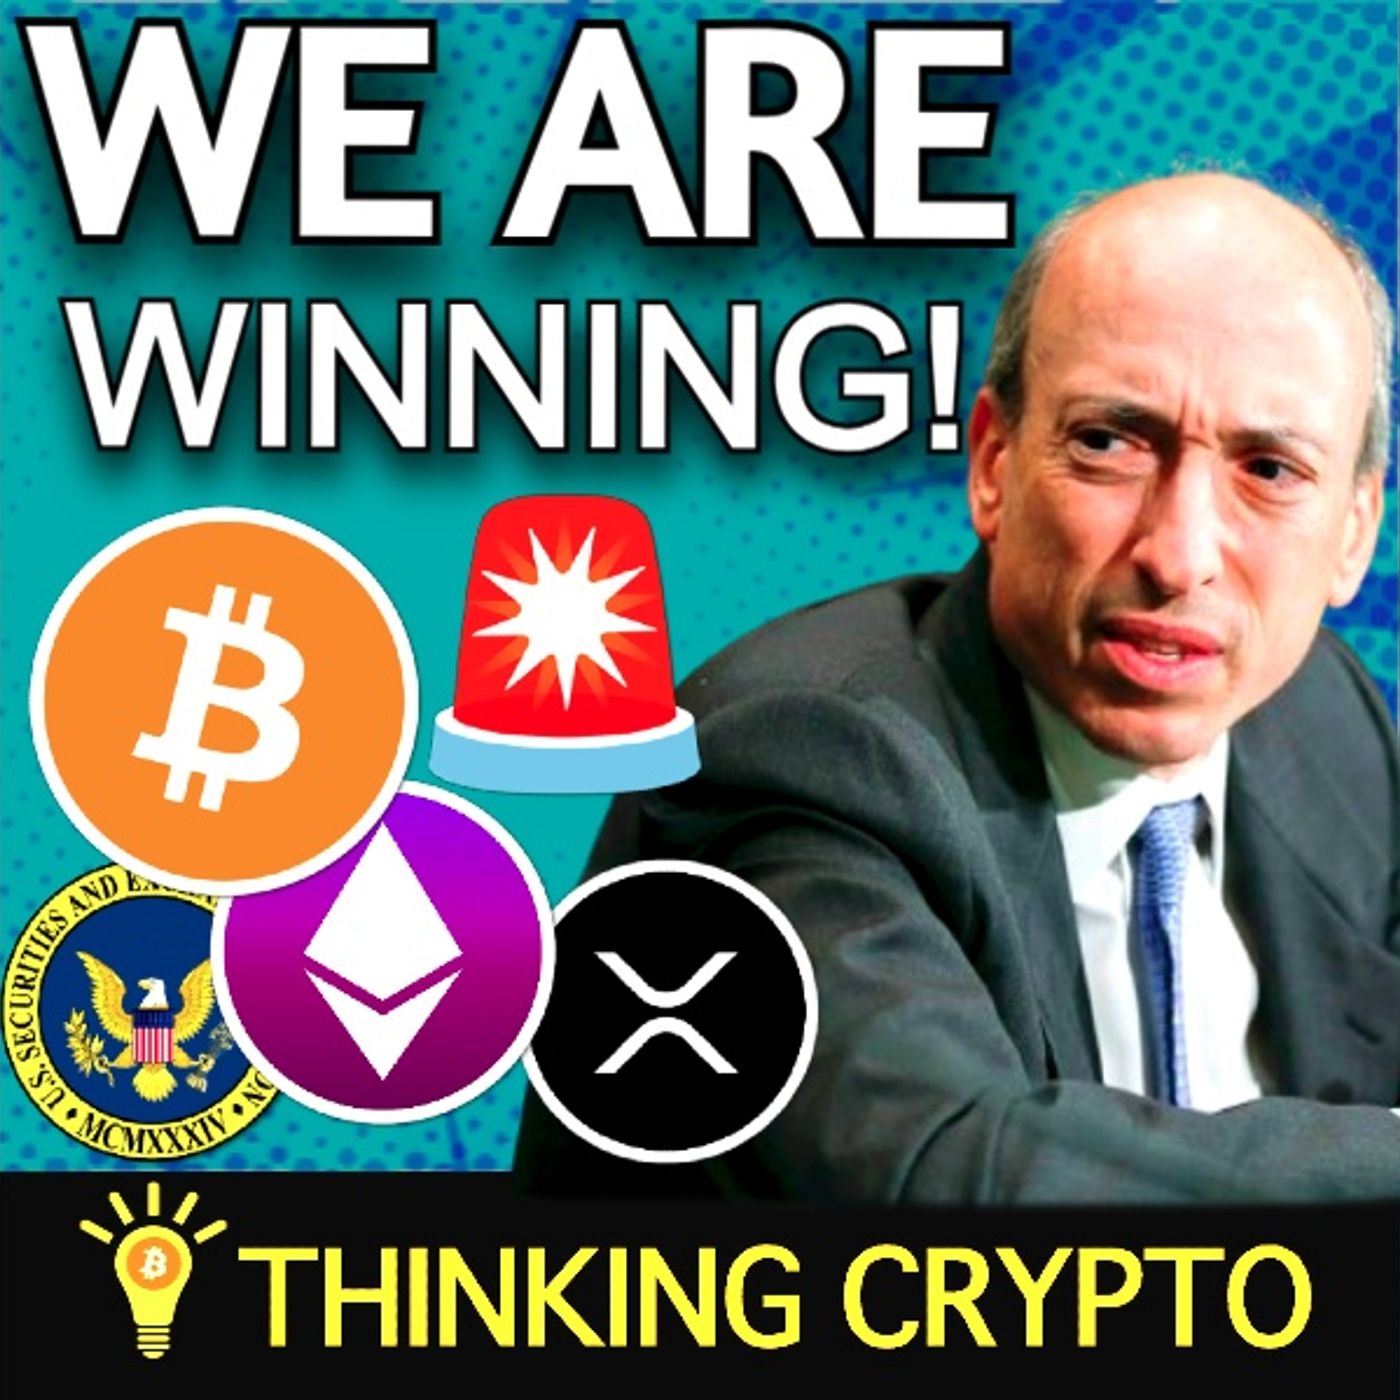 🚨CRYPTO SCORES HUGE WIN AGAINST SEC AS JUDGE ORDERS SEC TO PAY $1.8M TO DEBTBOX & DISMISSES CASE!